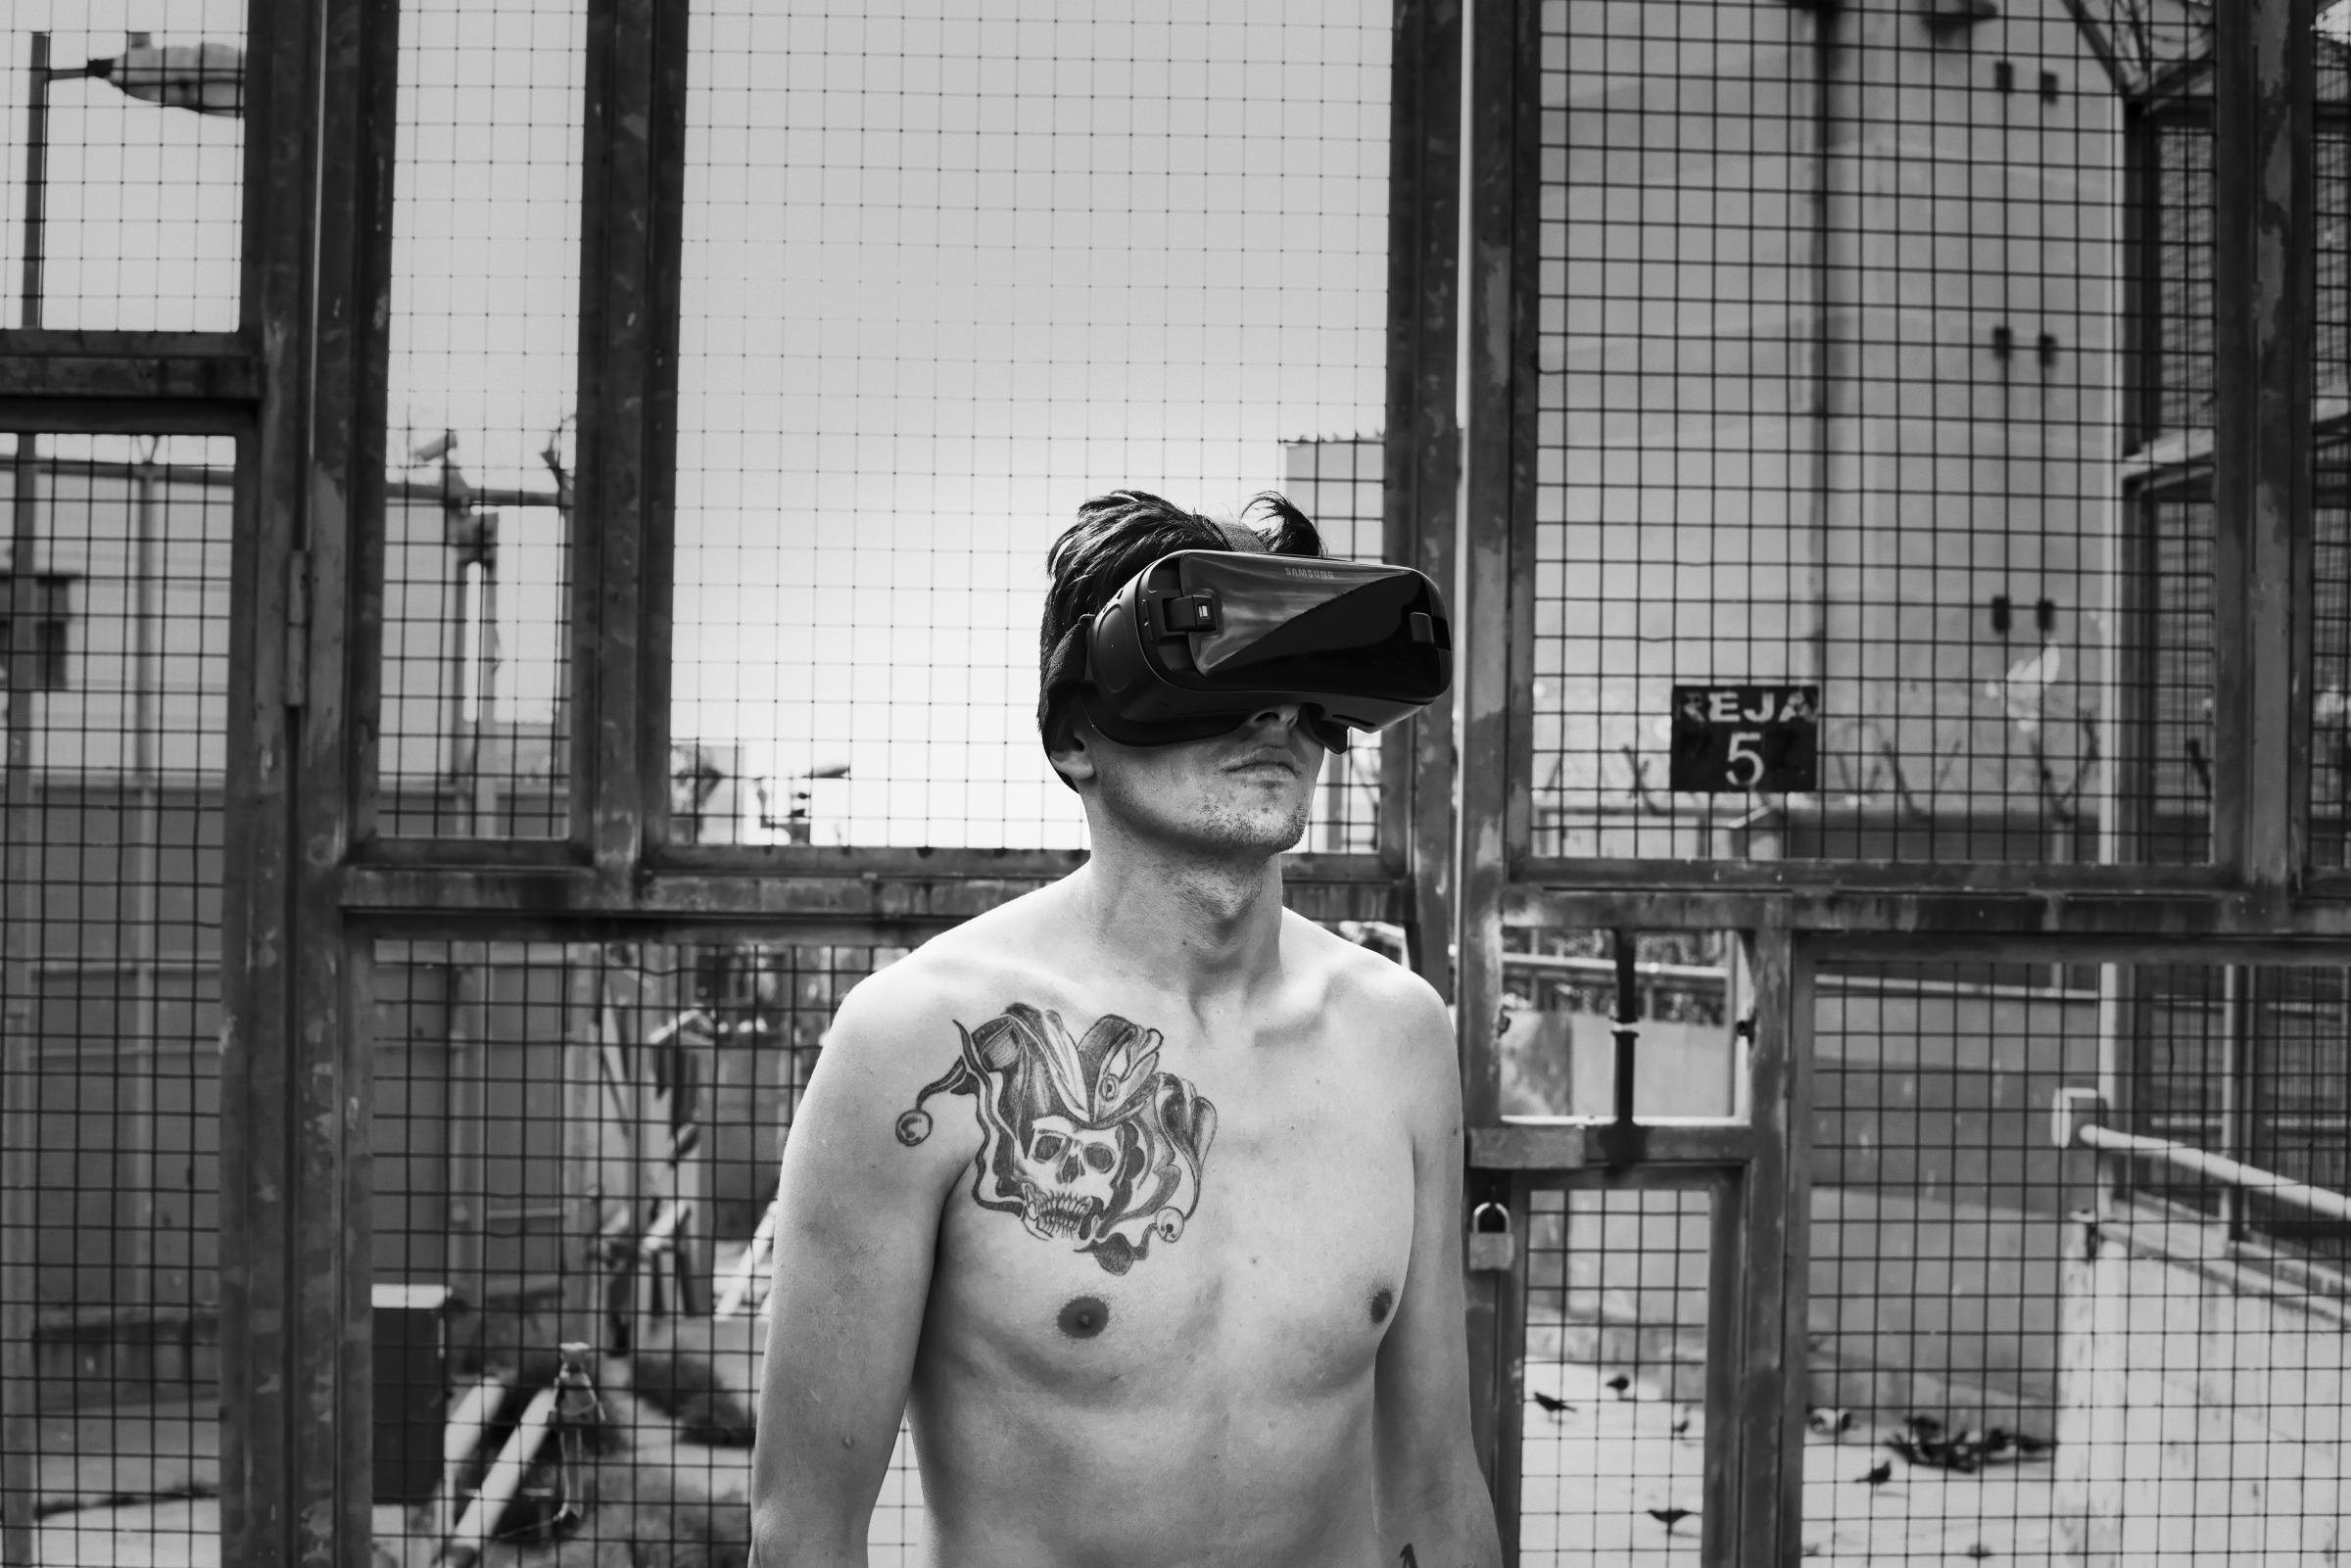 Grid Nº5/Reja Nº5 - Jes&uacute;s is a prisoner who is part of the workshop in which virtual reality elements are...